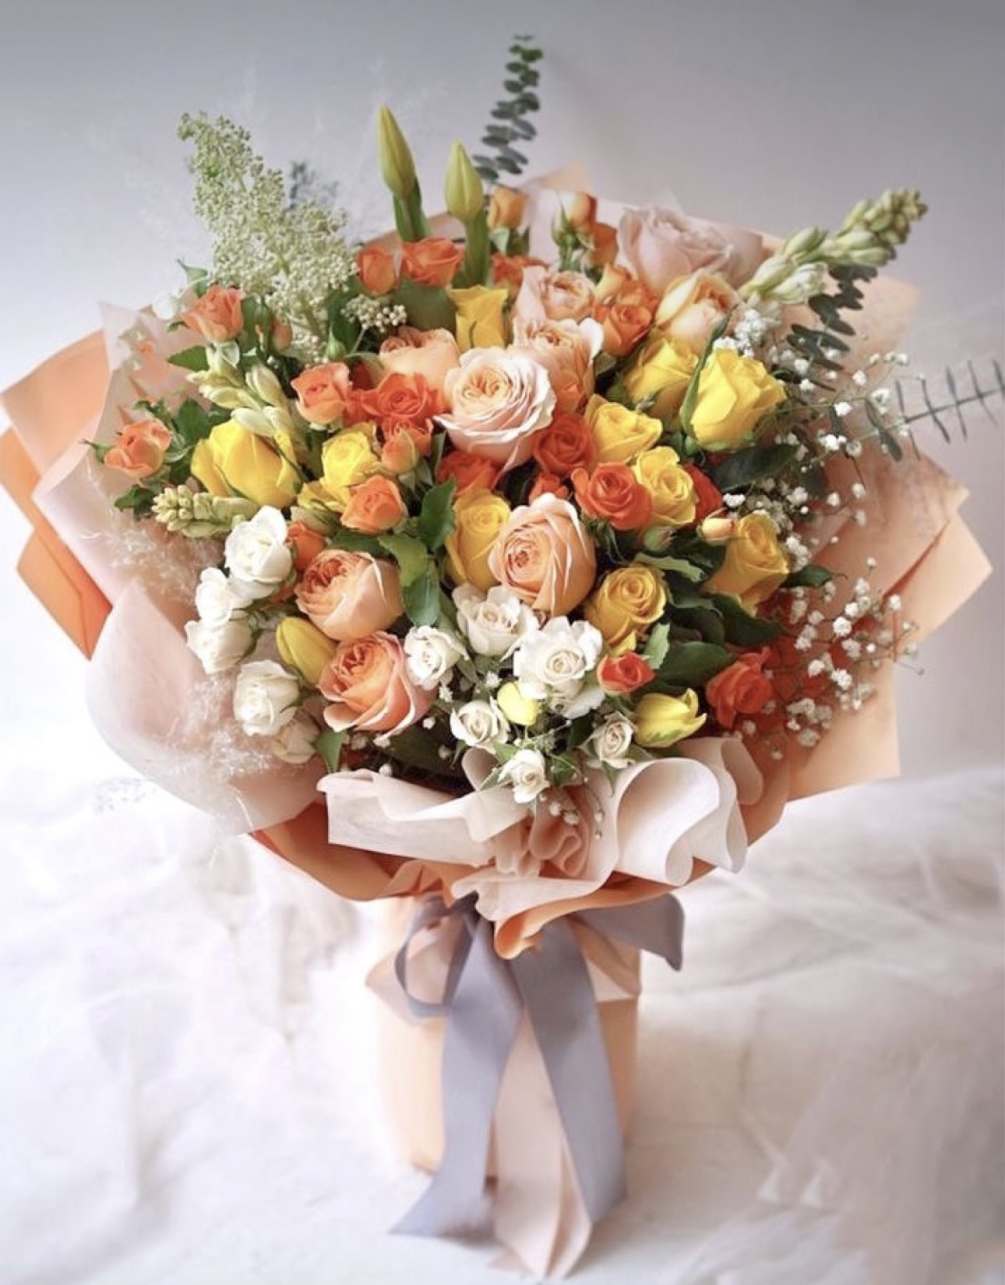 Enjoy the beauty of variety with this colorful mixed bouquet, created with